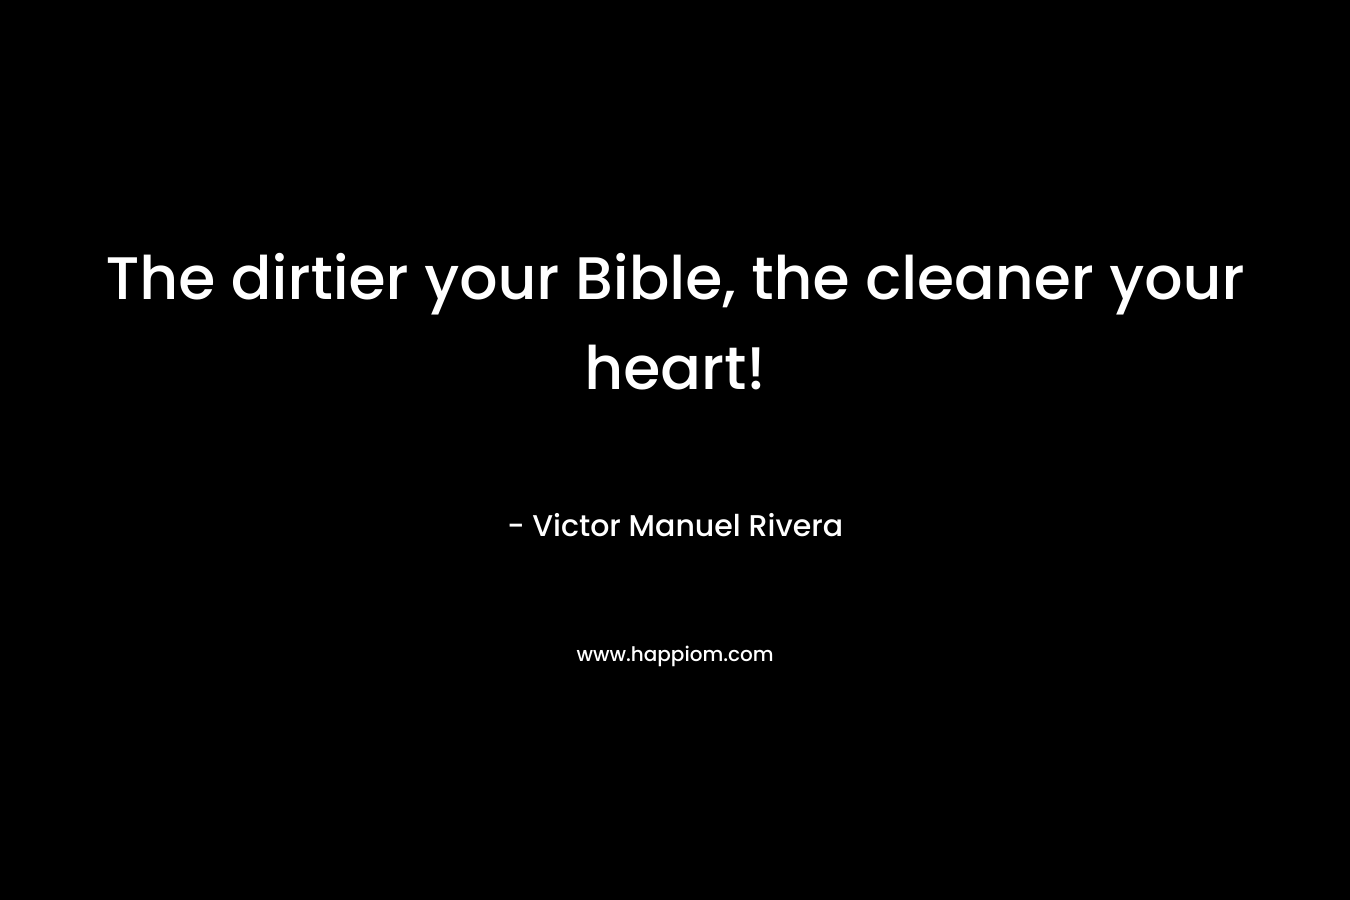 The dirtier your Bible, the cleaner your heart!